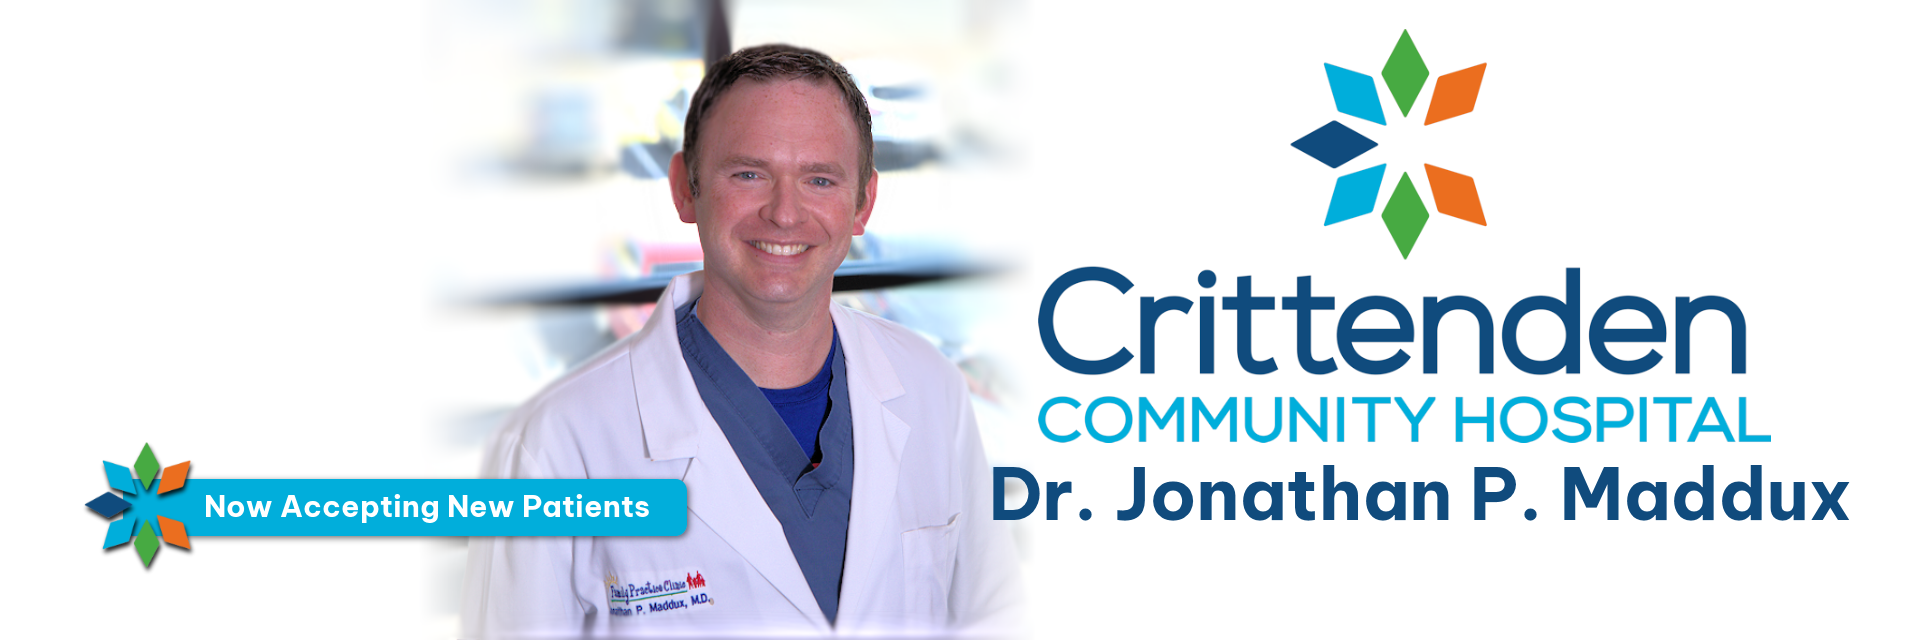 Banner picture of Dr. Jonathan P. Maddux. Banner says:

*Now Accepting New Patients
Crittenden COMMUNITY HOSPITAL 
Dr. Jonathan P. Maddux